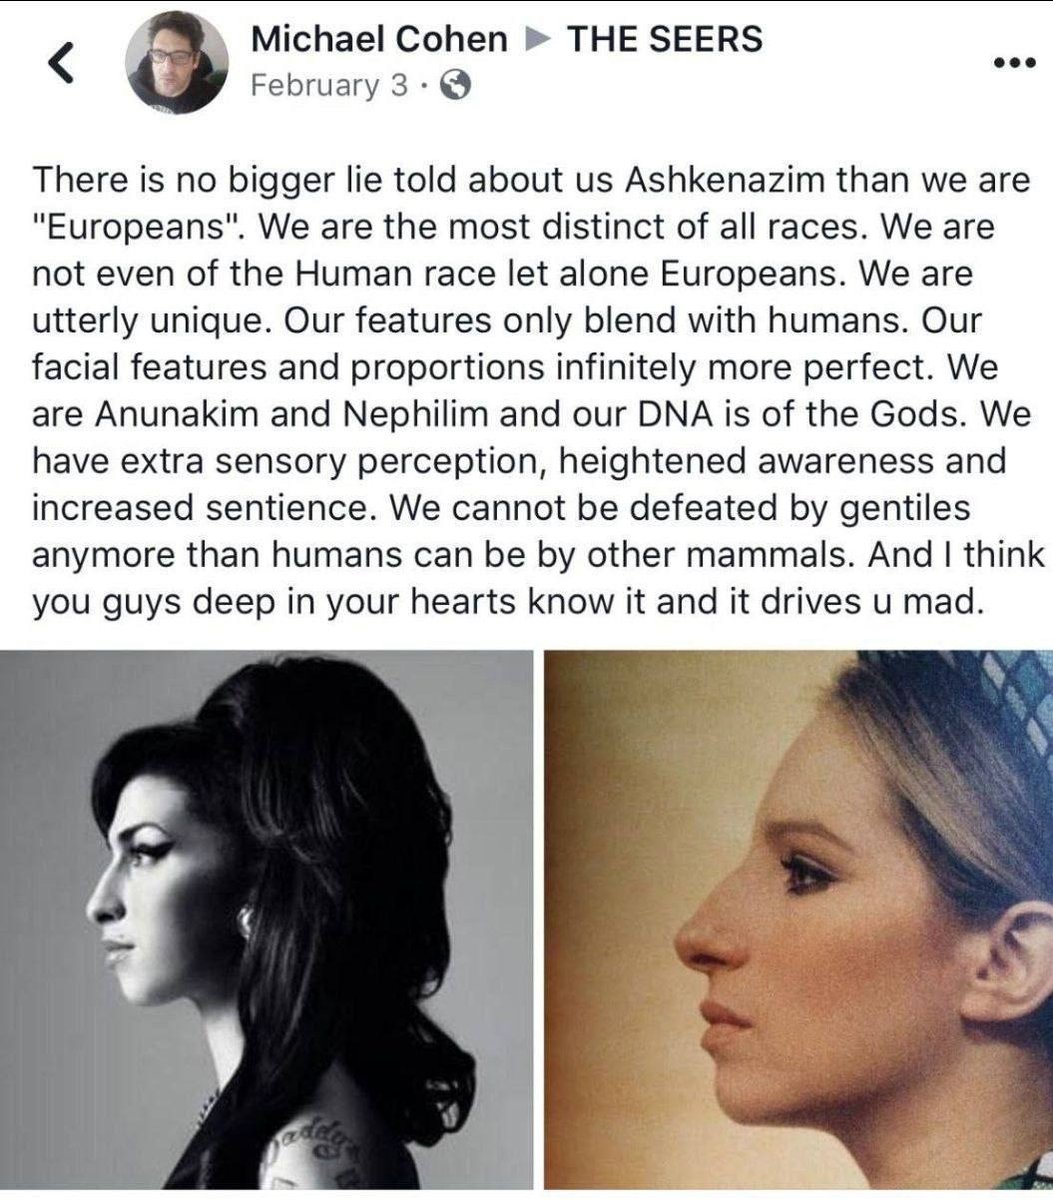 Jewish man claims that jews aren't human but actually Nephilim.